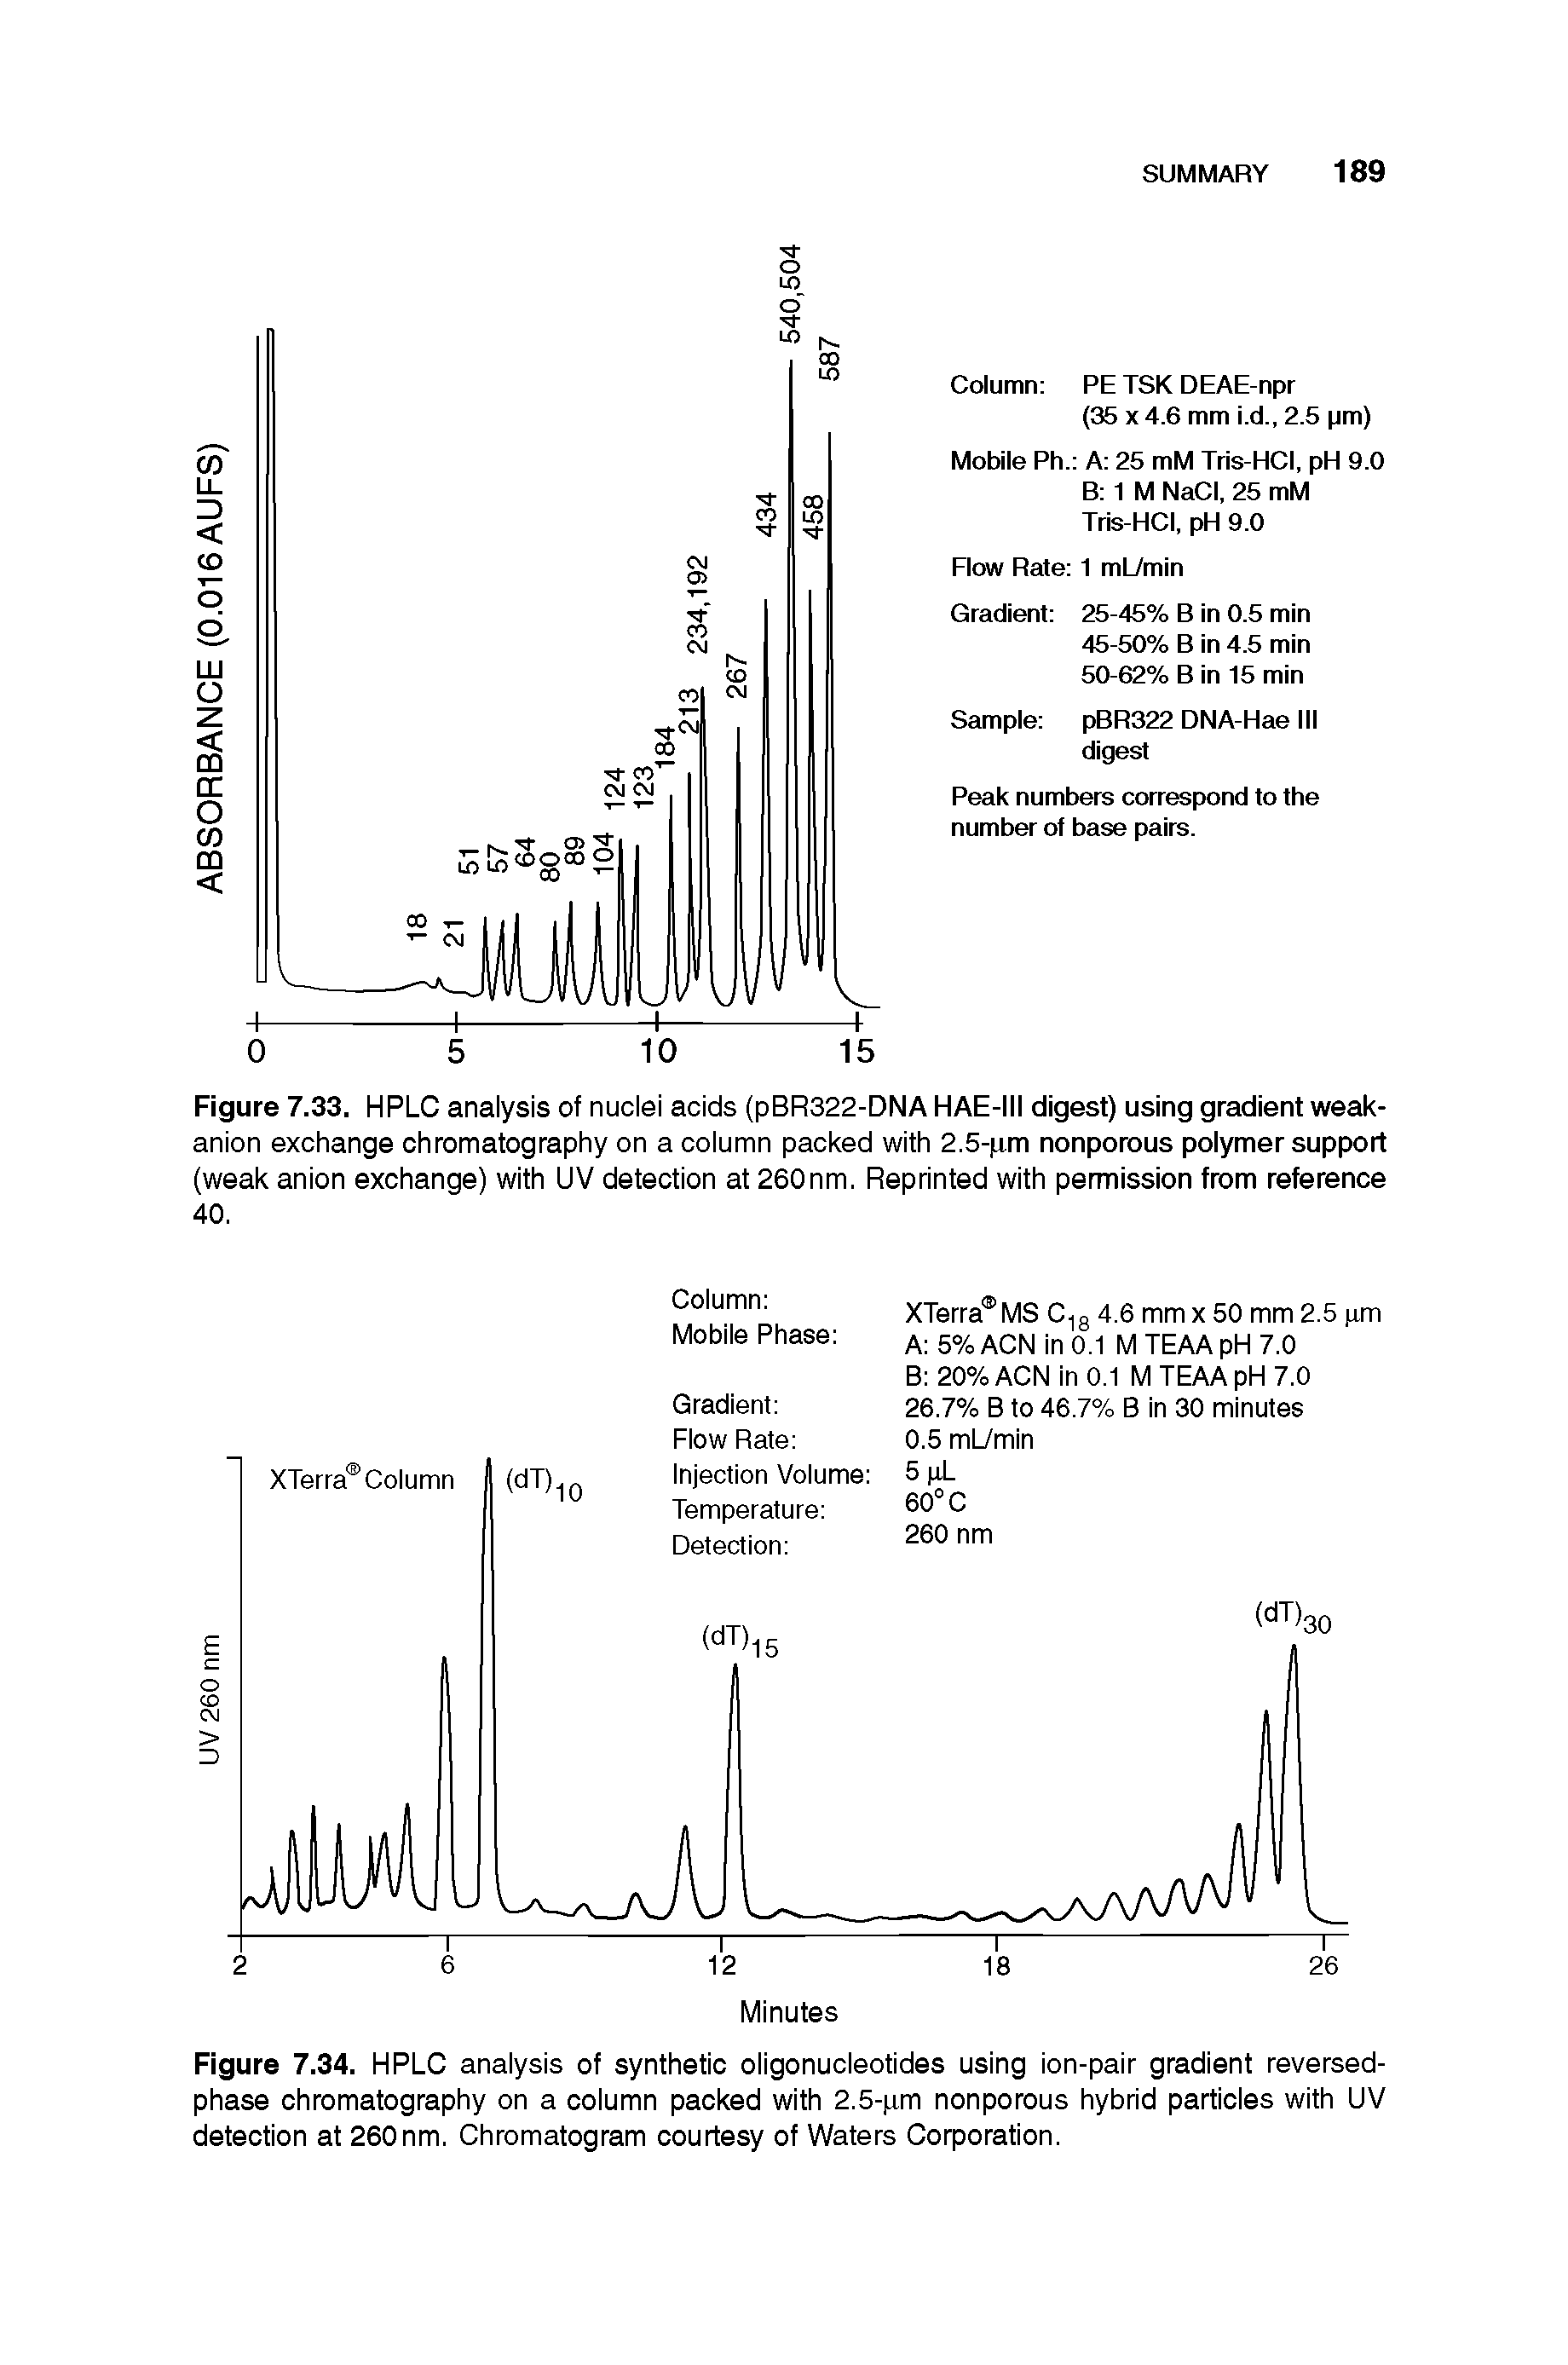 Figure 7.34. HPLC analysis of synthetic oligonucleotides using ion-pair gradient reversed-phase chromatography on a column packed with 2.5-pm nonporous hybrid particles with UV detection at 260nm. Chromatogram courtesy of Waters Corporation.